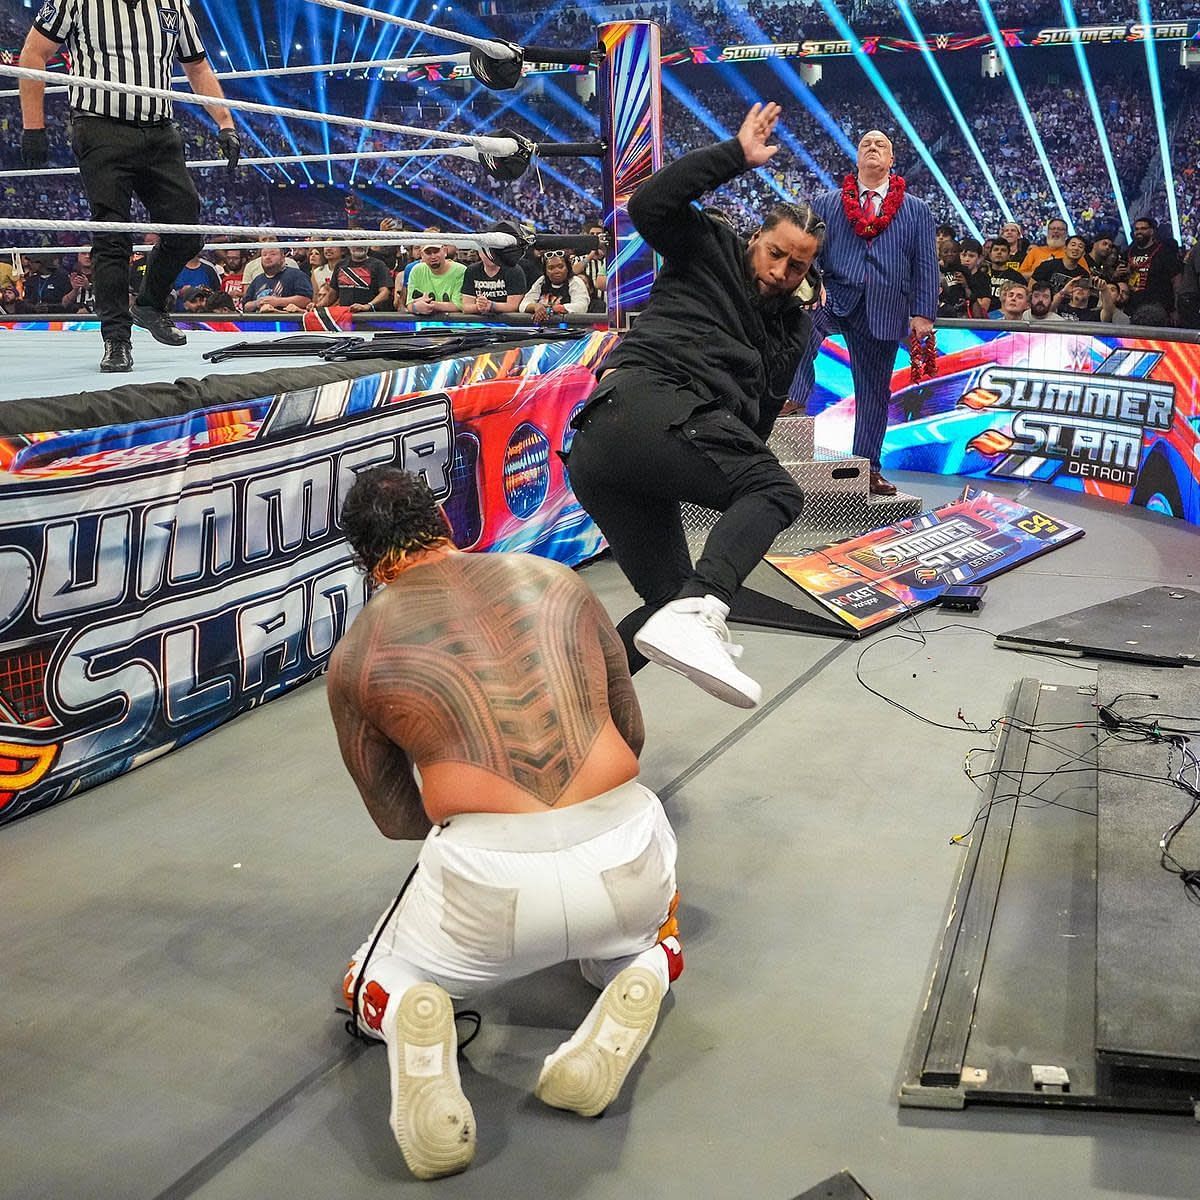 Jimmy Uso helped Roman Reigns overcome Jey Uso in Tribal Combat.